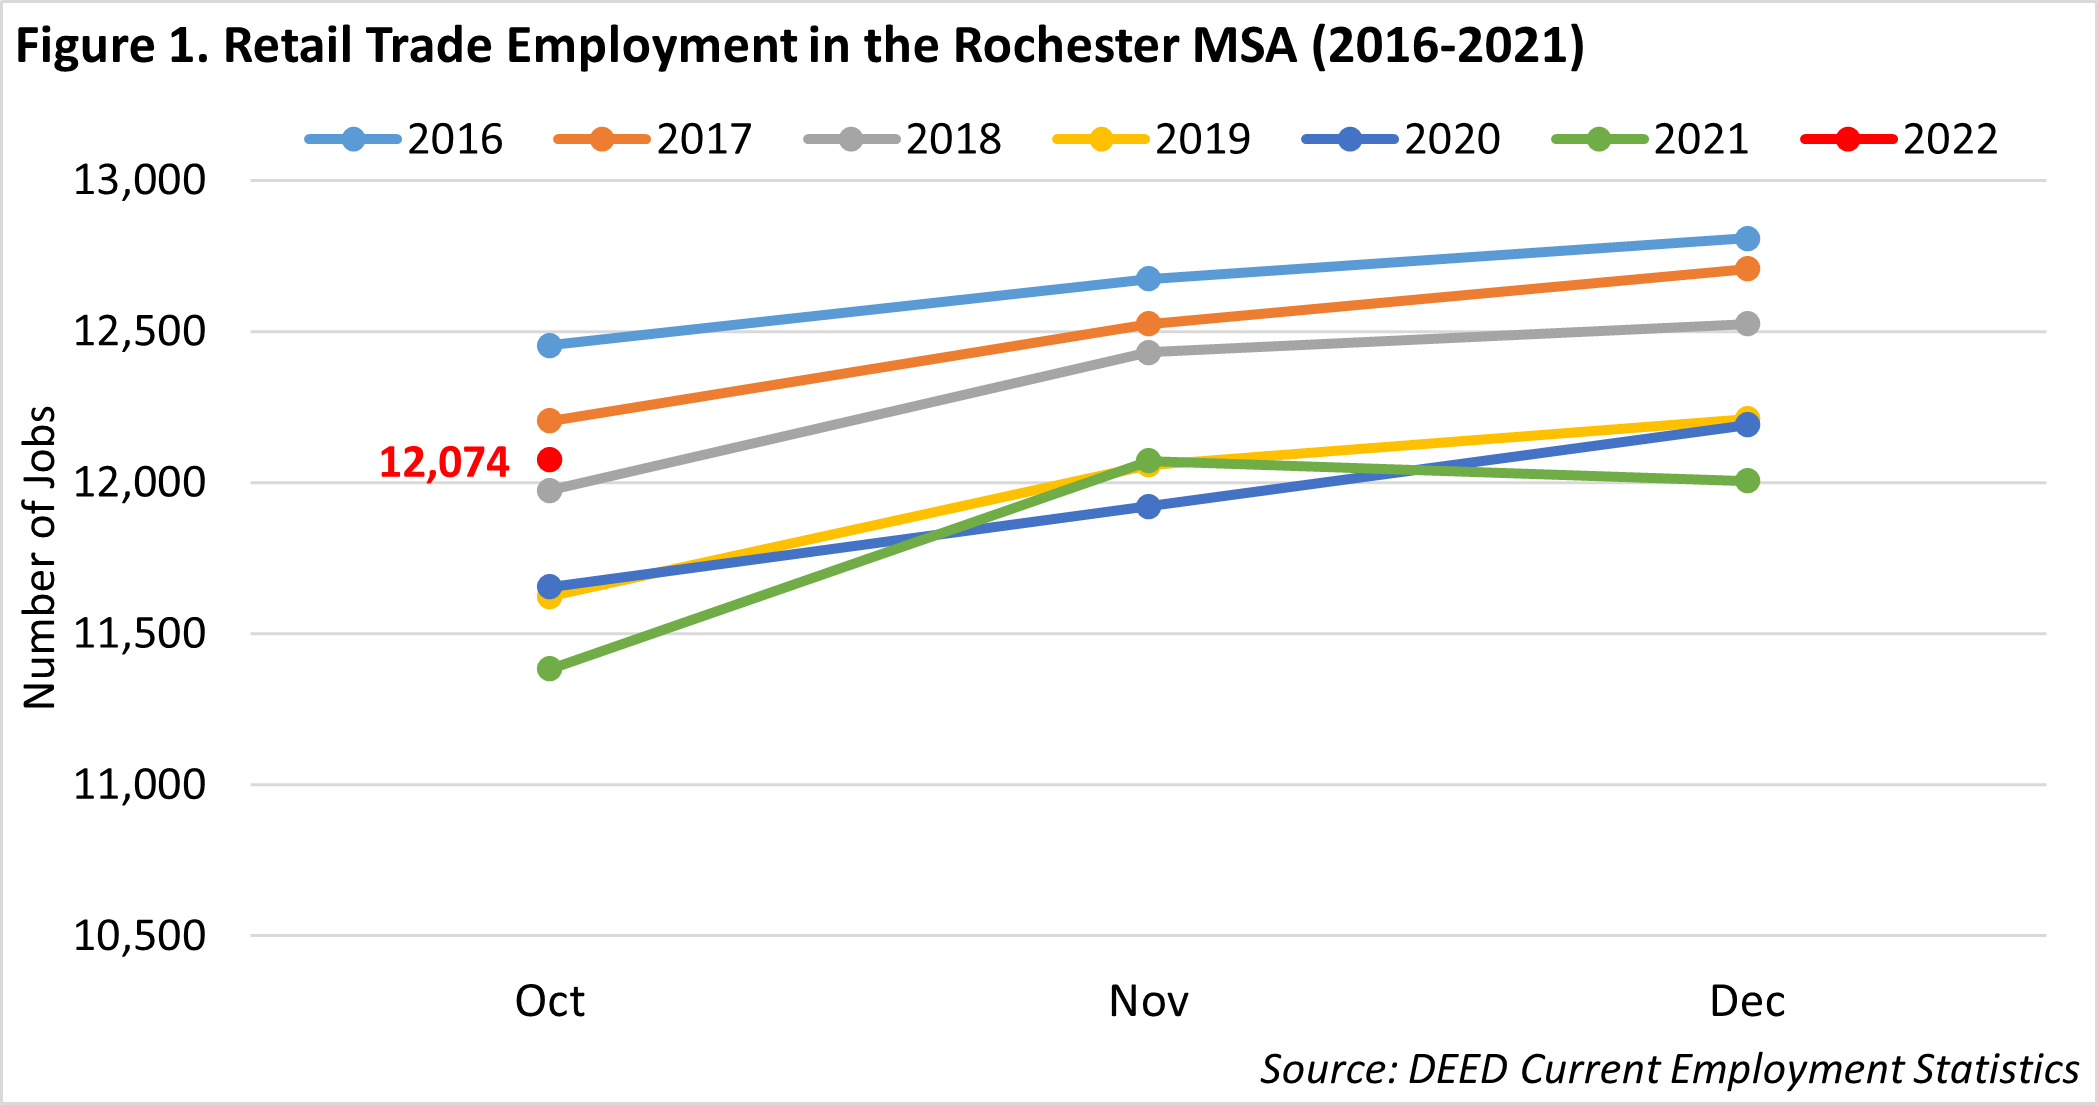 Retail Trade Employment in the Rochester MSA